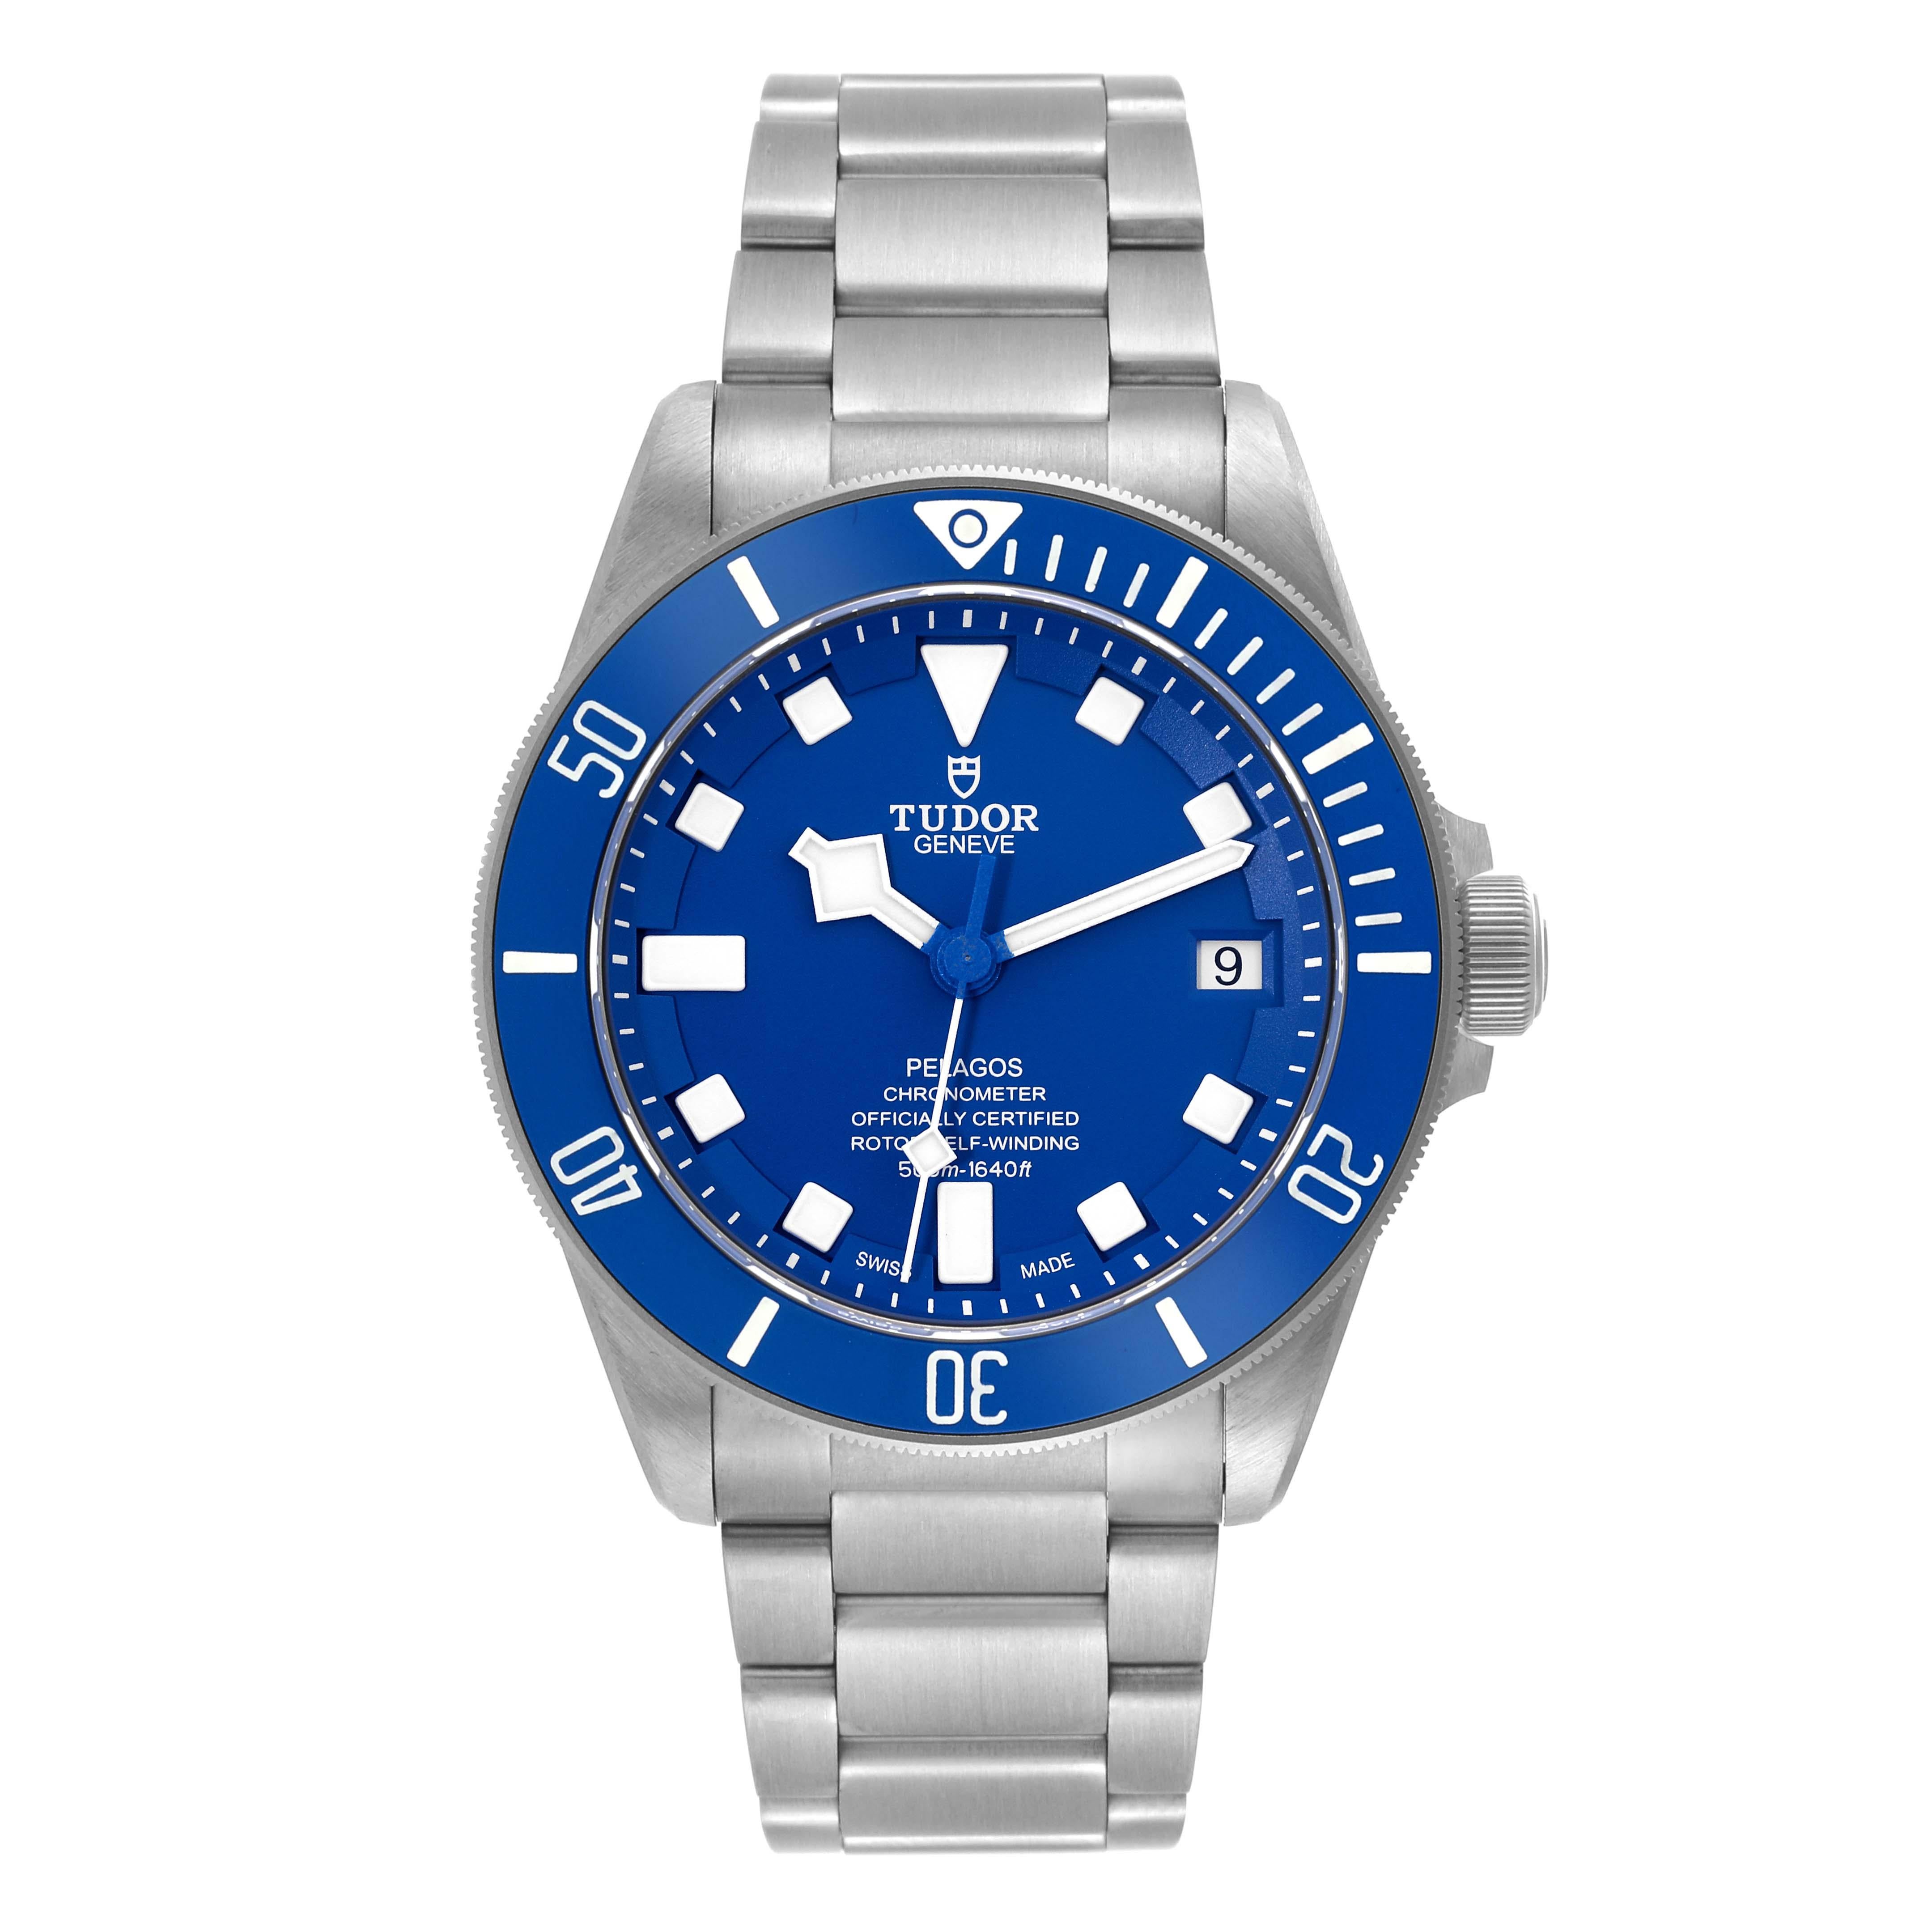 Tudor Pelagos Blue Dial Automatic Titanium Mens Watch 25600TB Box Card. Automatic self-winding movement. Titanium case 42.0 mm in diameter. Tudor logo on a crown. Pointed crown guards. Unidirectional rotating bezel with blue ceramic disk. Scratch